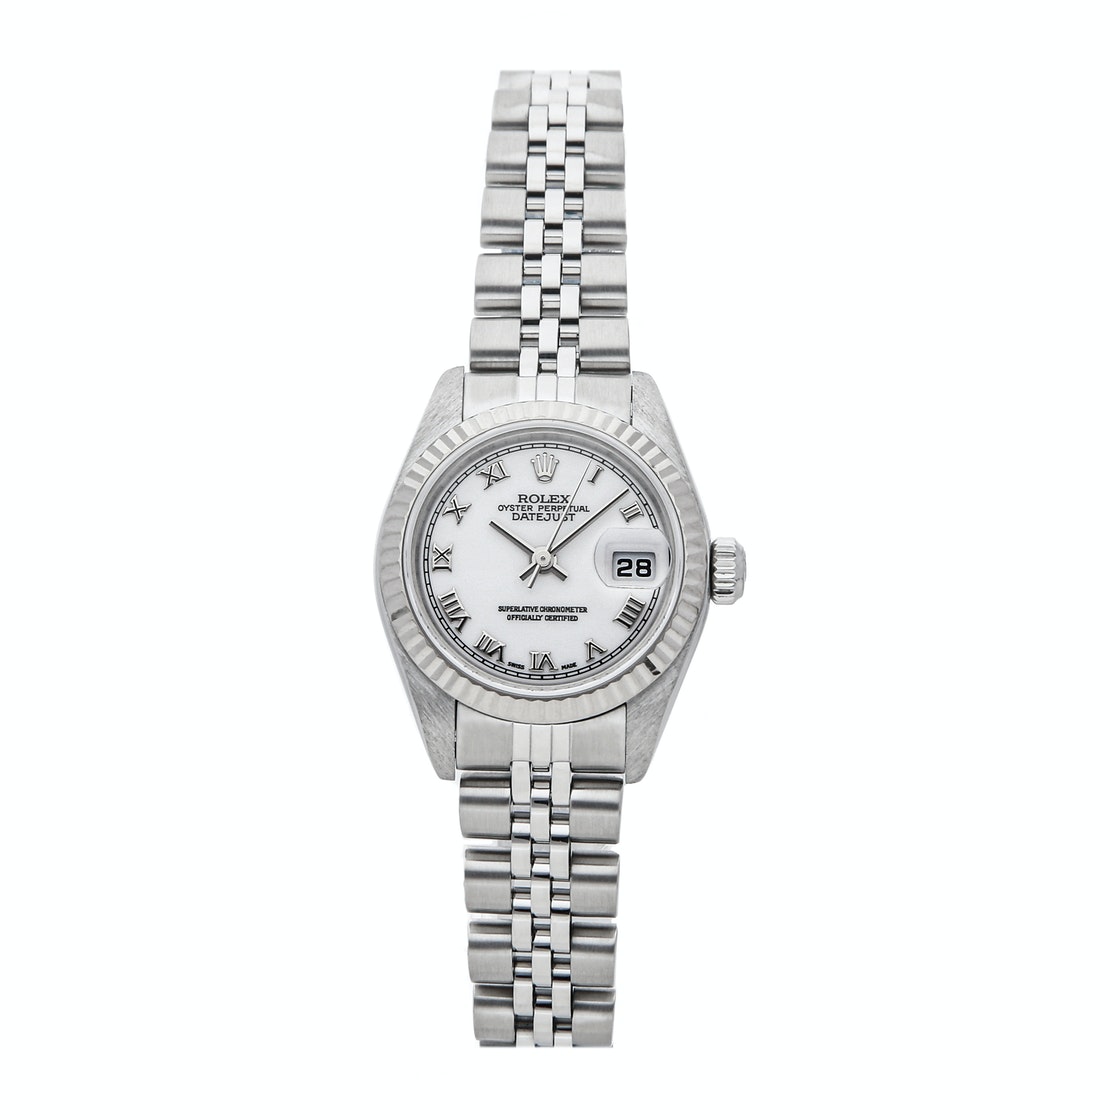 Rolex White 18K White Gold And Stainless Steel Datejust 79174 Women's Wristwatch 26 MM